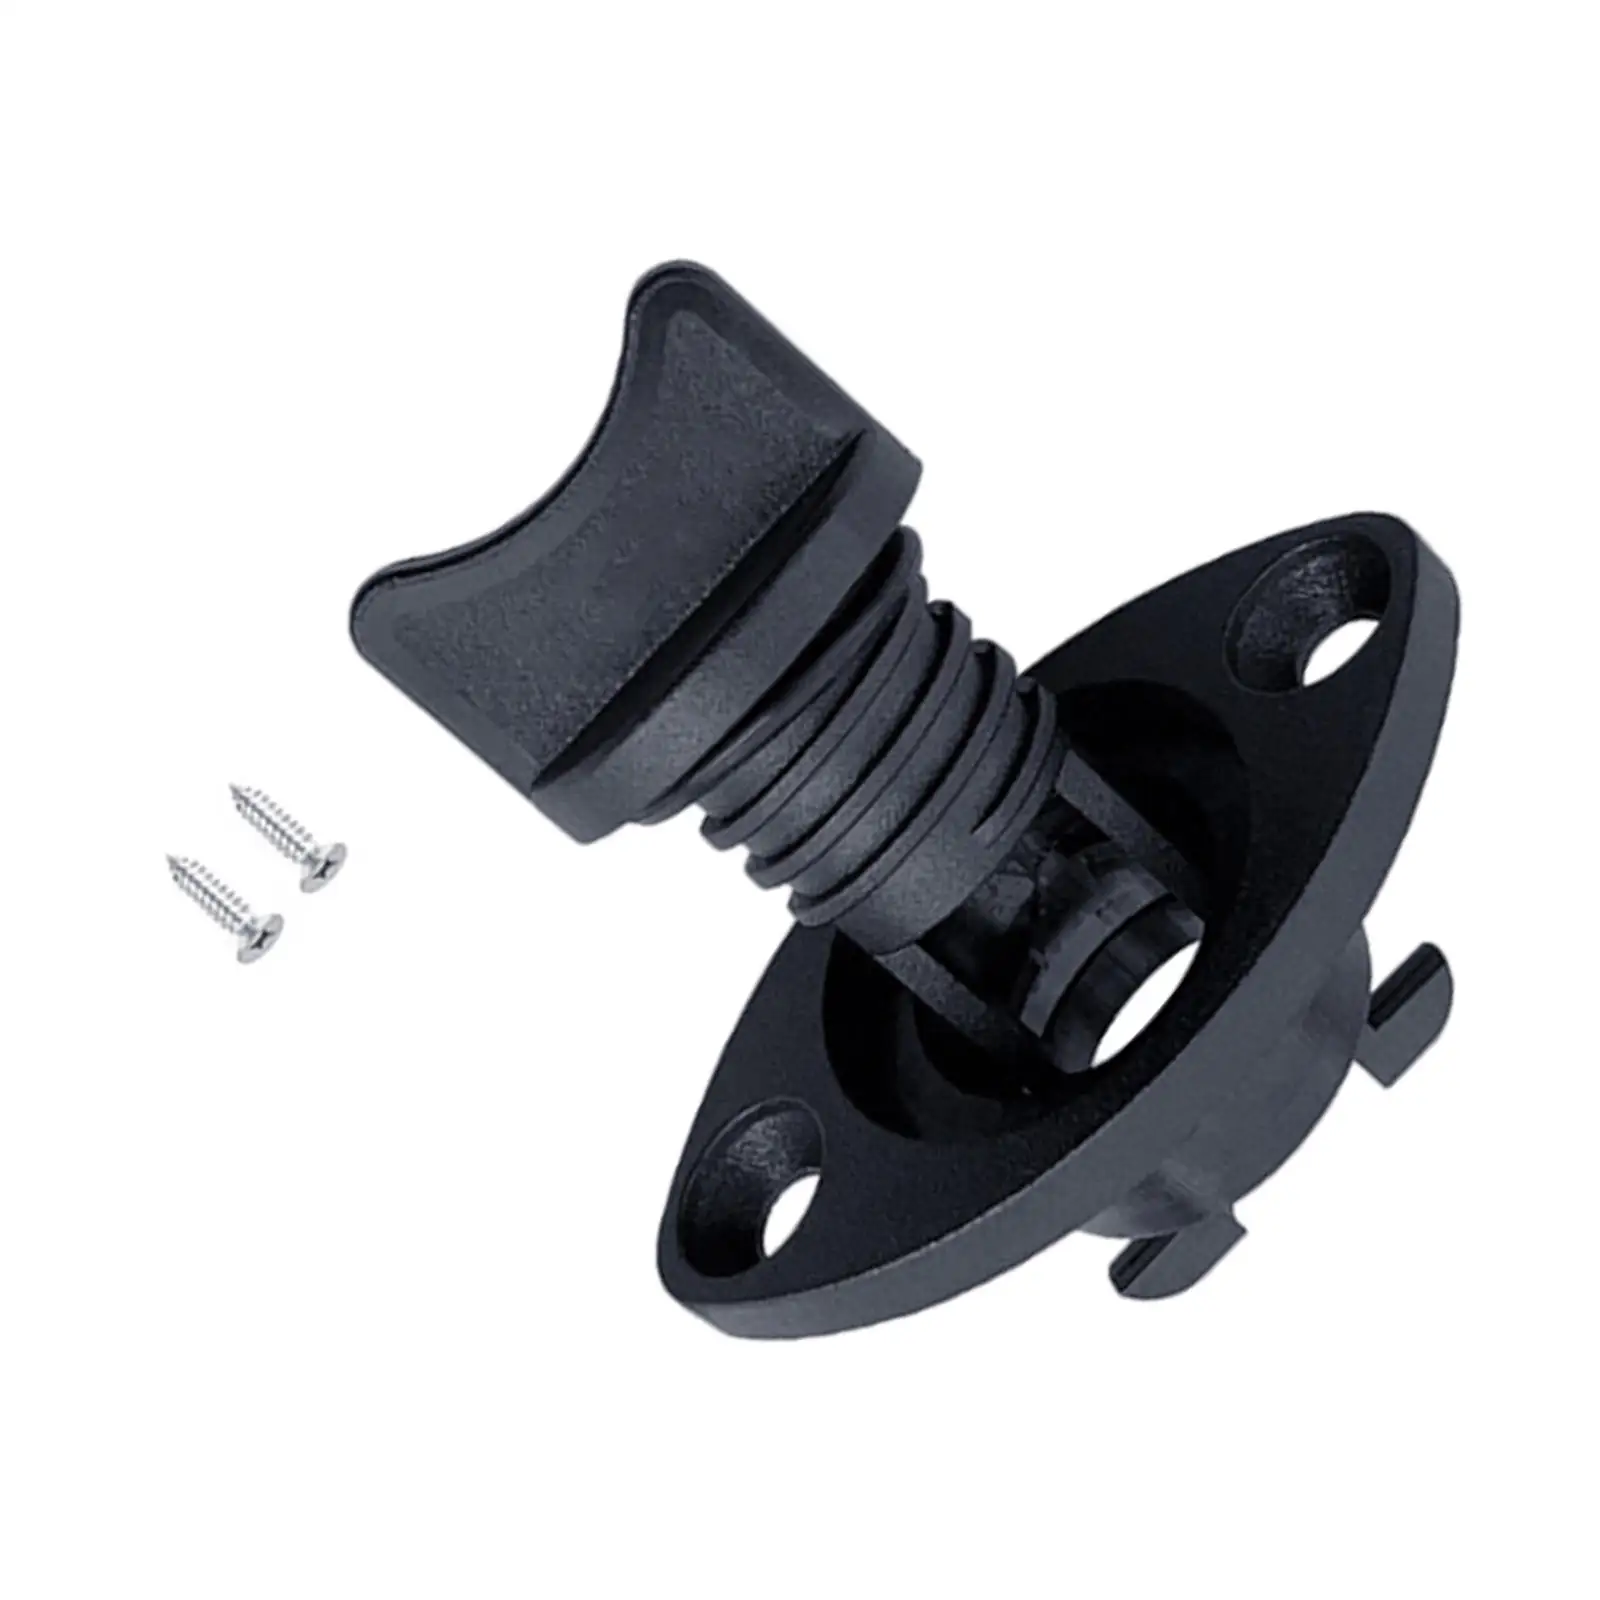 1`` 25mm Boat Drain Plug Screw Type Accessories Supplies Moulding Hardware Black Hull Thread Plugs for Yacht Canoe Plumbing